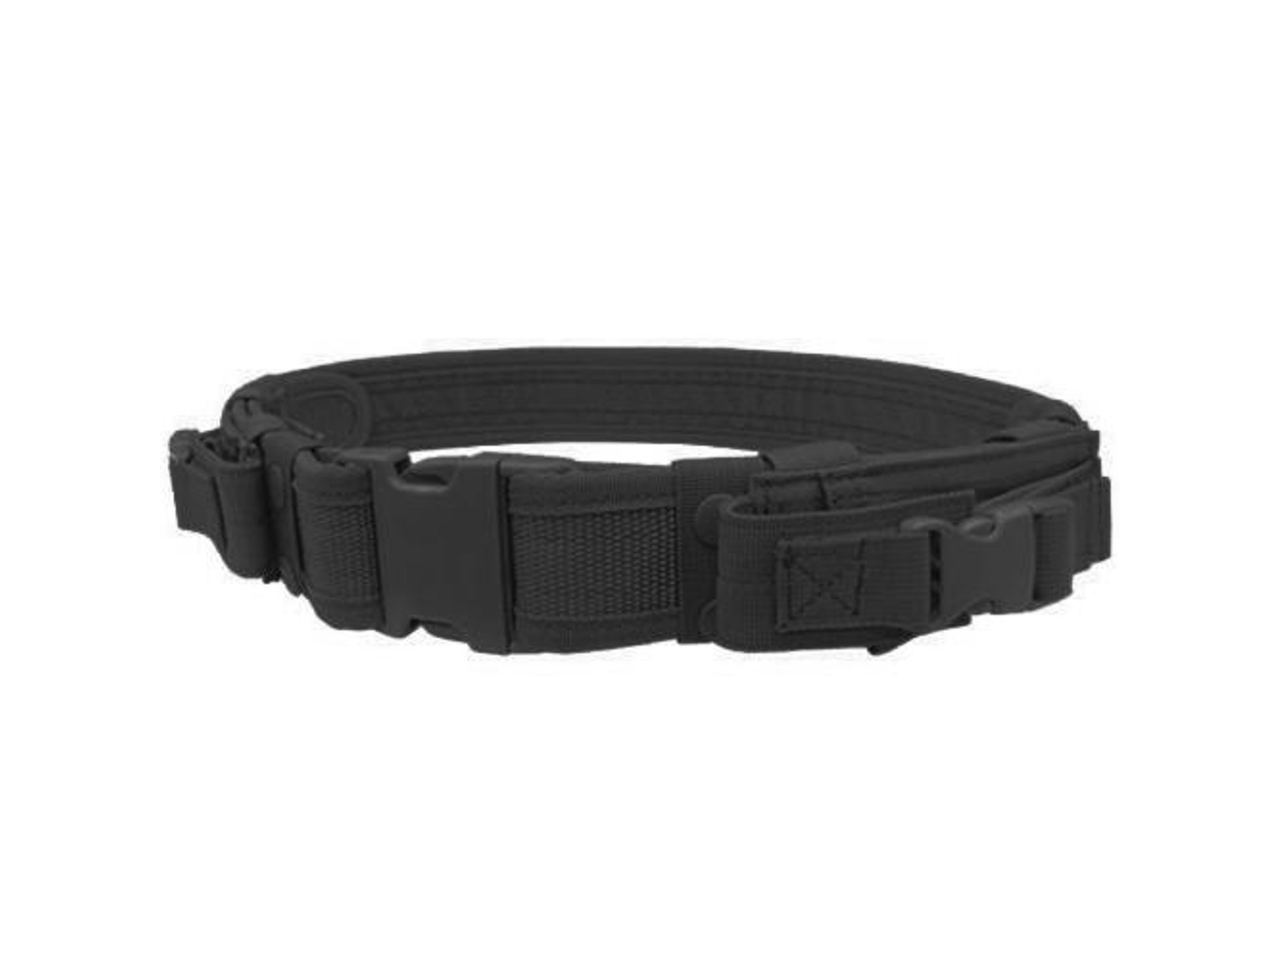 Condor Belt with Dual Pistol Mag Pouches, Black